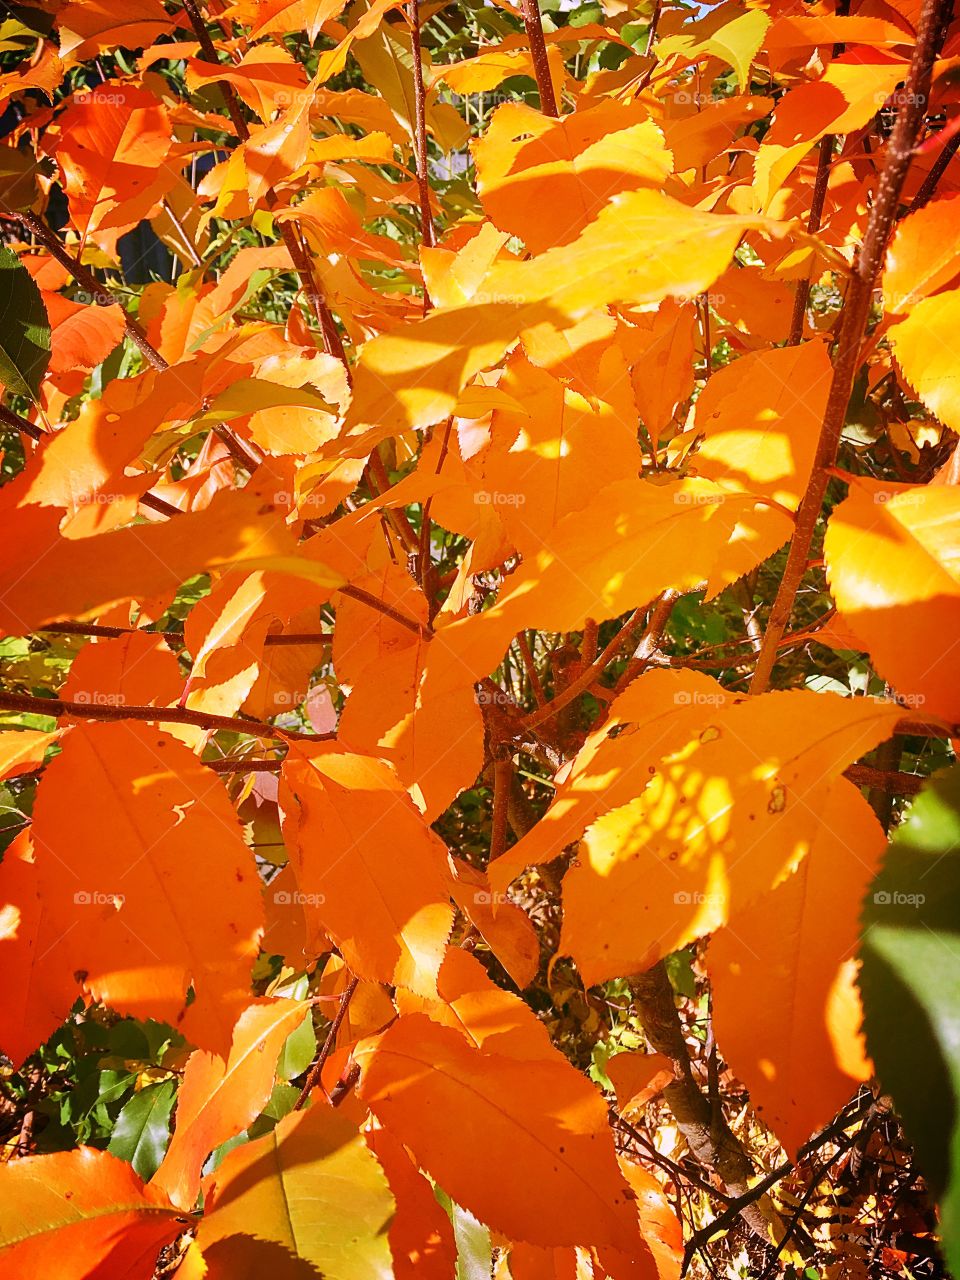 Natural texture of autumn leaves in the sun